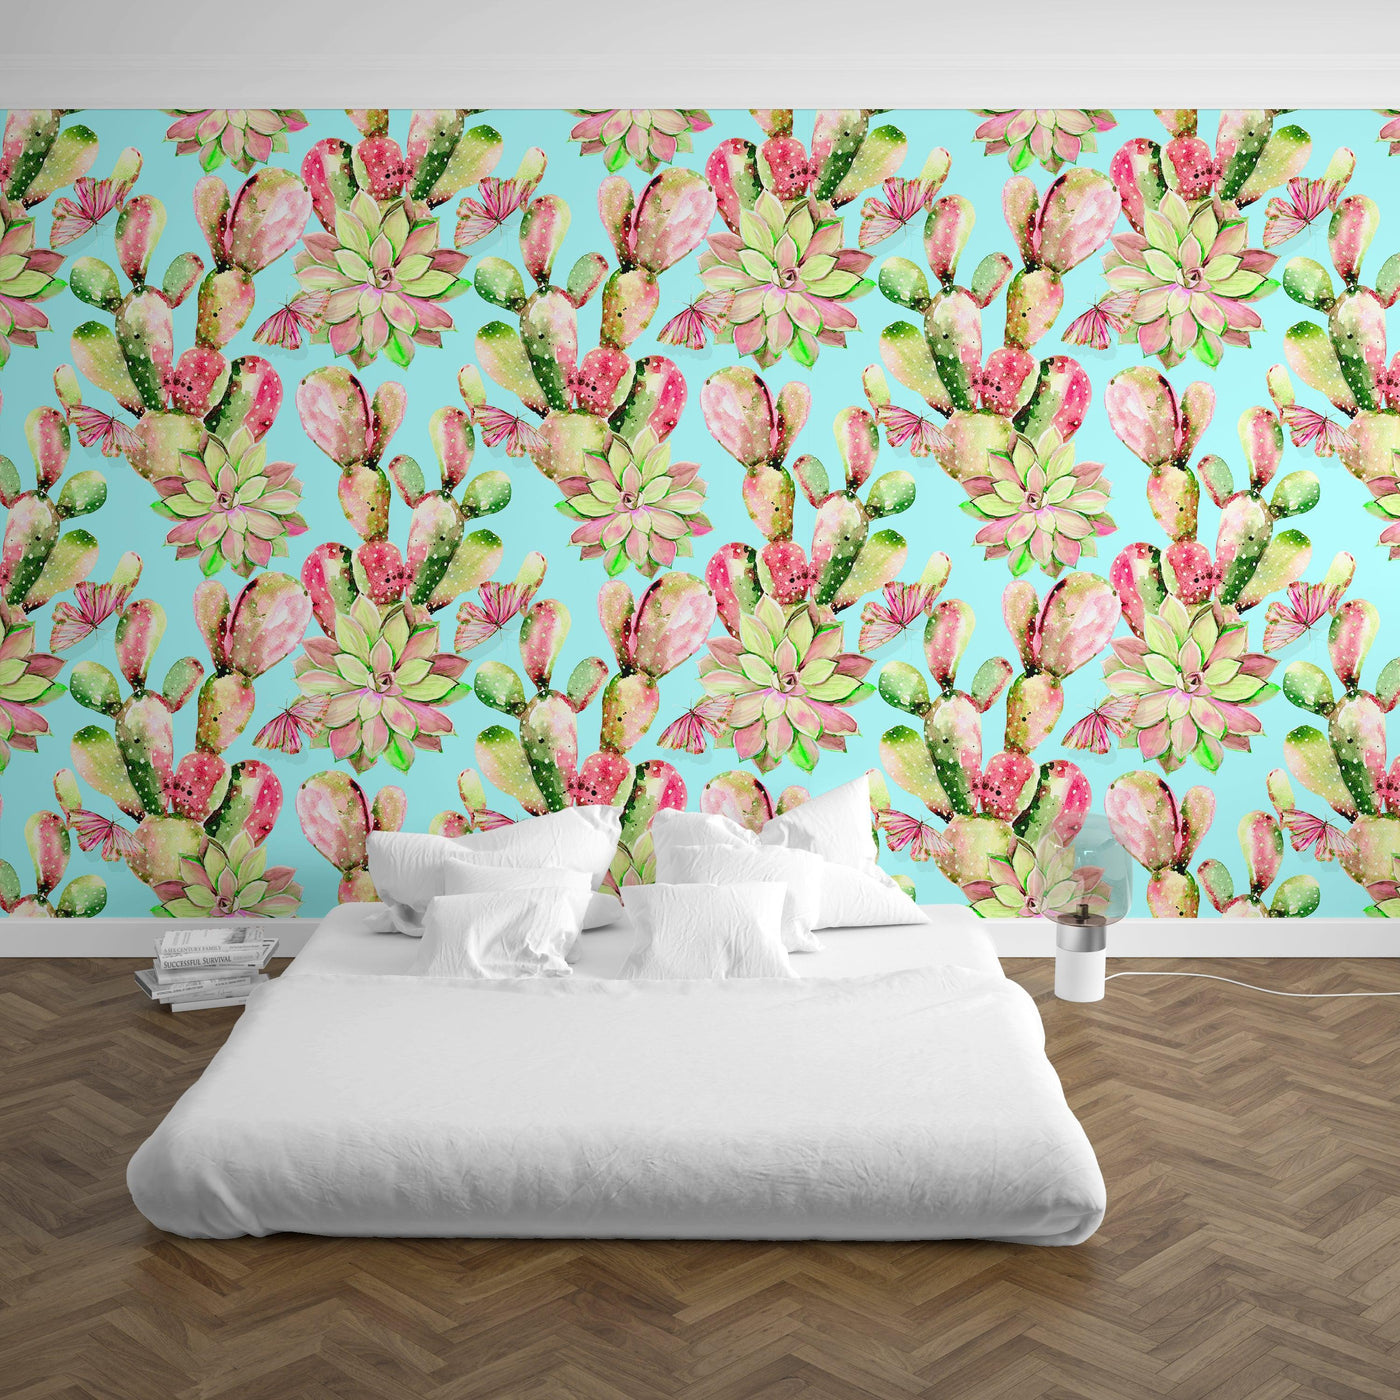 Sweet Cactus Mural Wallpaper (m²)-Wall Decor-CACTUS WALL ART, CACTUS WALLPAPERS, FLORAL WALLPAPERS, KIDS WALLPAPERS, MURALS, MURALS / WALLPAPERS, NON-WOVEN WALLPAPER-Forest Homes-Nature inspired decor-Nature decor